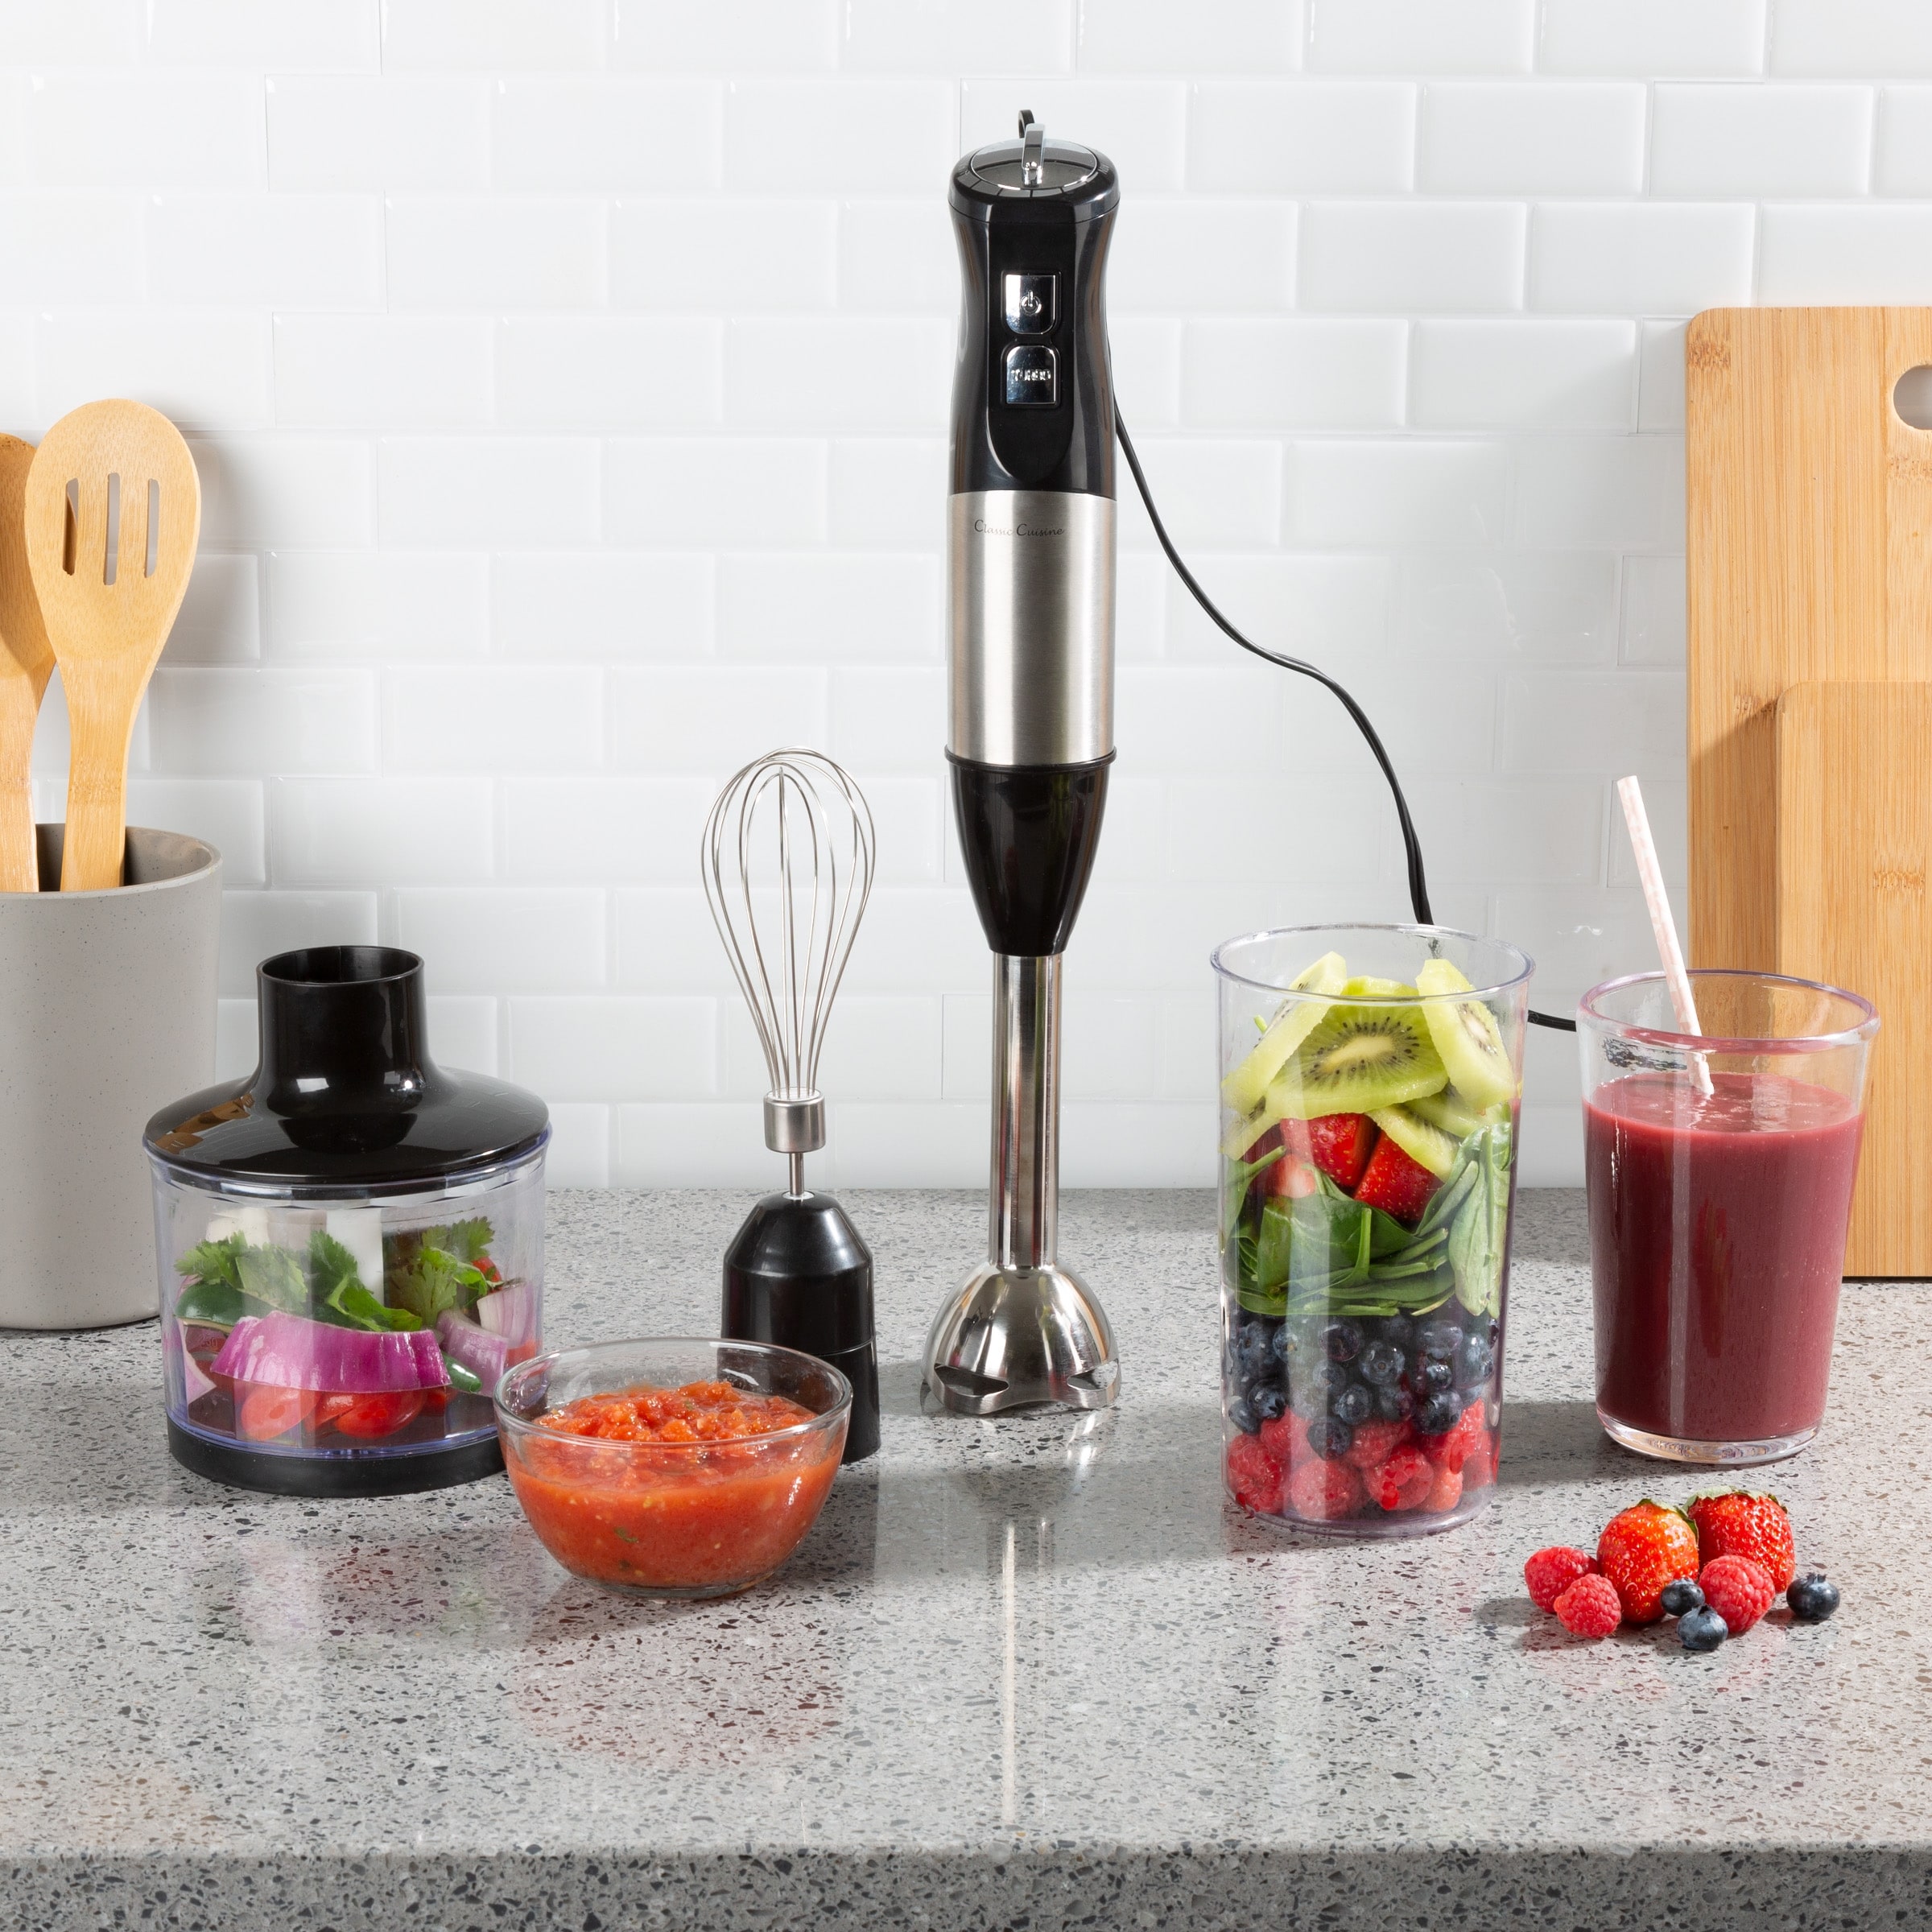 https://ak1.ostkcdn.com/images/products/is/images/direct/7f06b1f8f6da8f3bf15c6a703f8147fb02833f23/Immersion-Blender-4-in-1-6-Speed-Hand-Mixer-Set-by-Classic-Cuisine.jpg